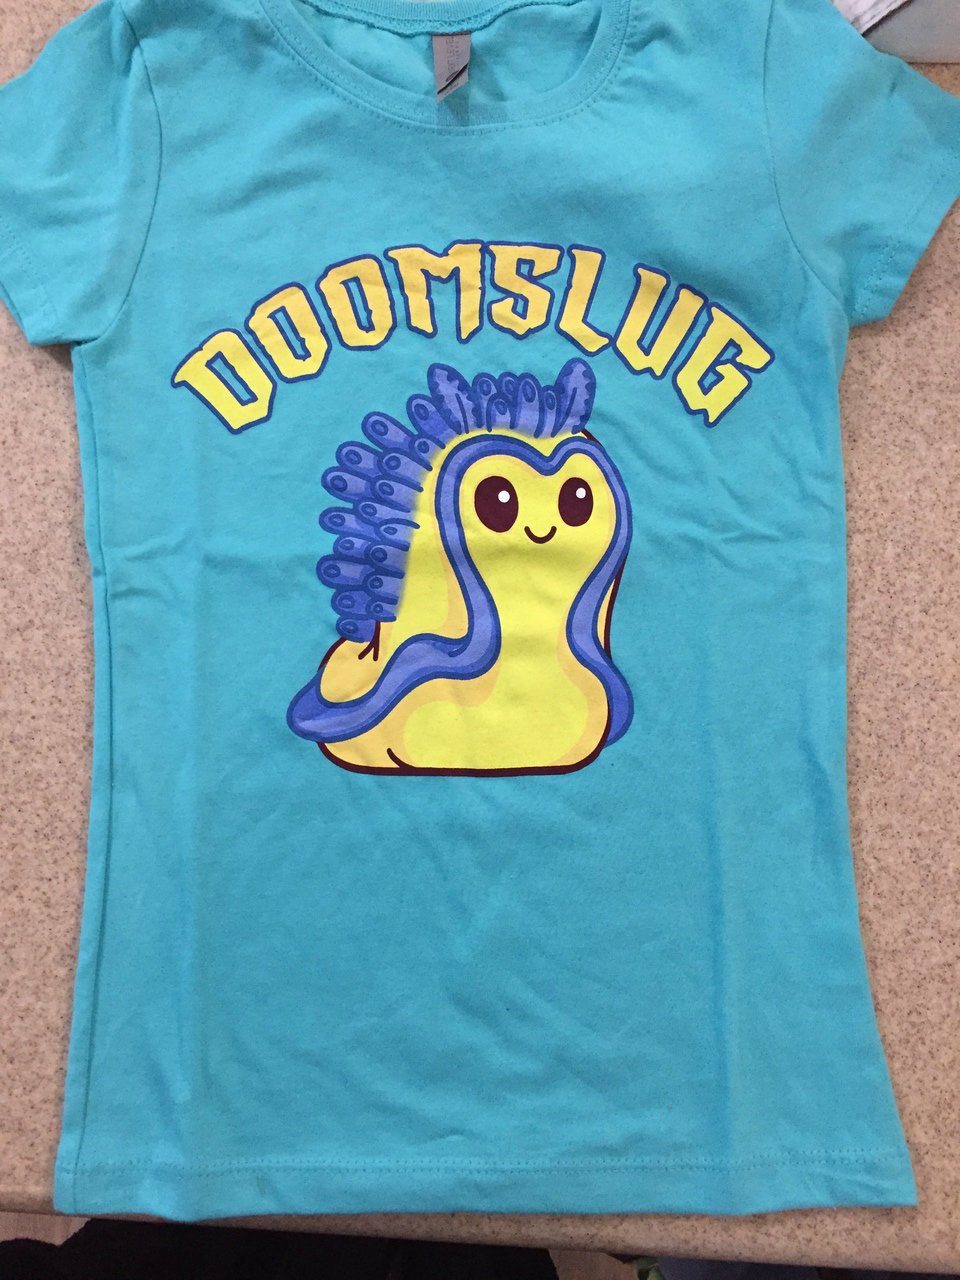 More information about "Holiday Store Update, Doomslug Shirt, Lanyards, and More!"